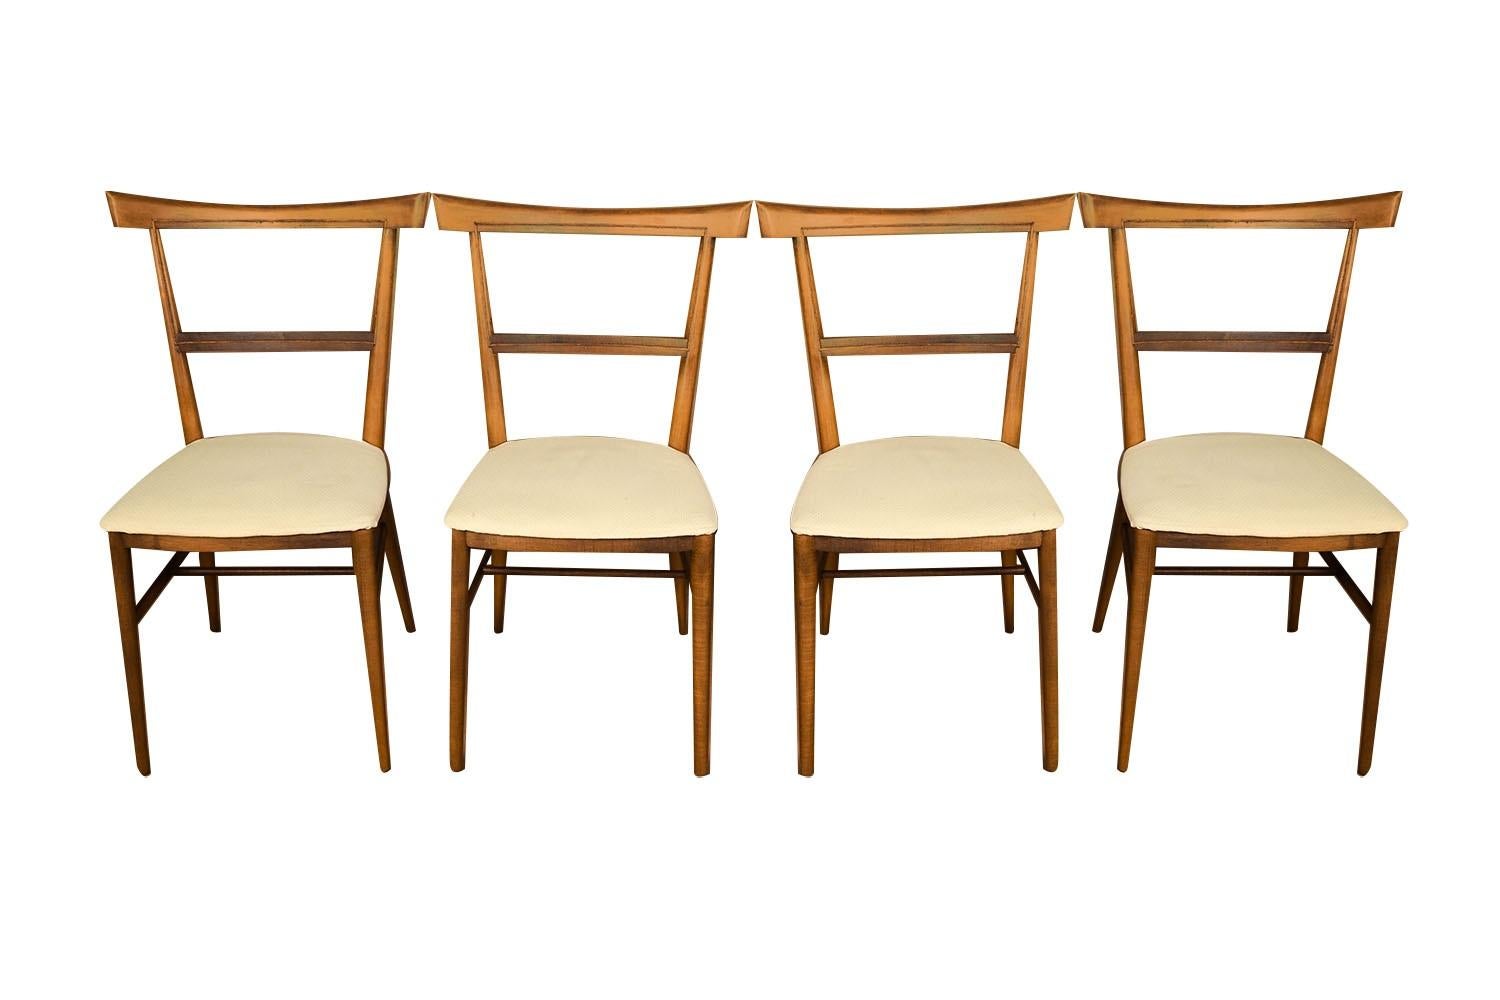 Incredibly well constructed set of four mid-century modern dining chairs designed by internationally known and revered designer Paul McCobb 